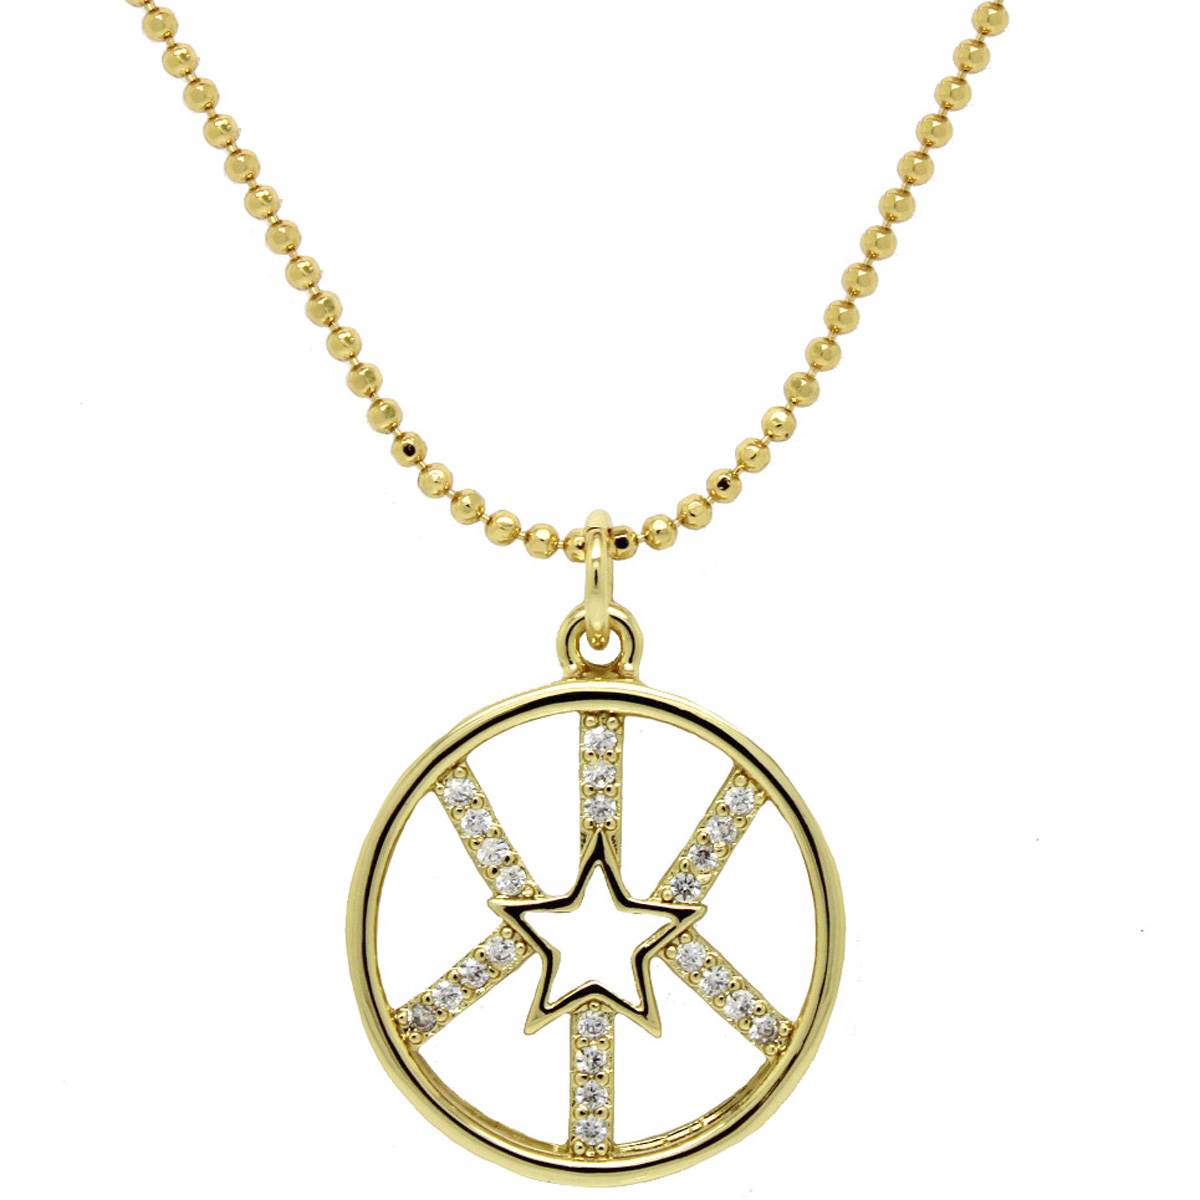 Gold Plated Star Pendant